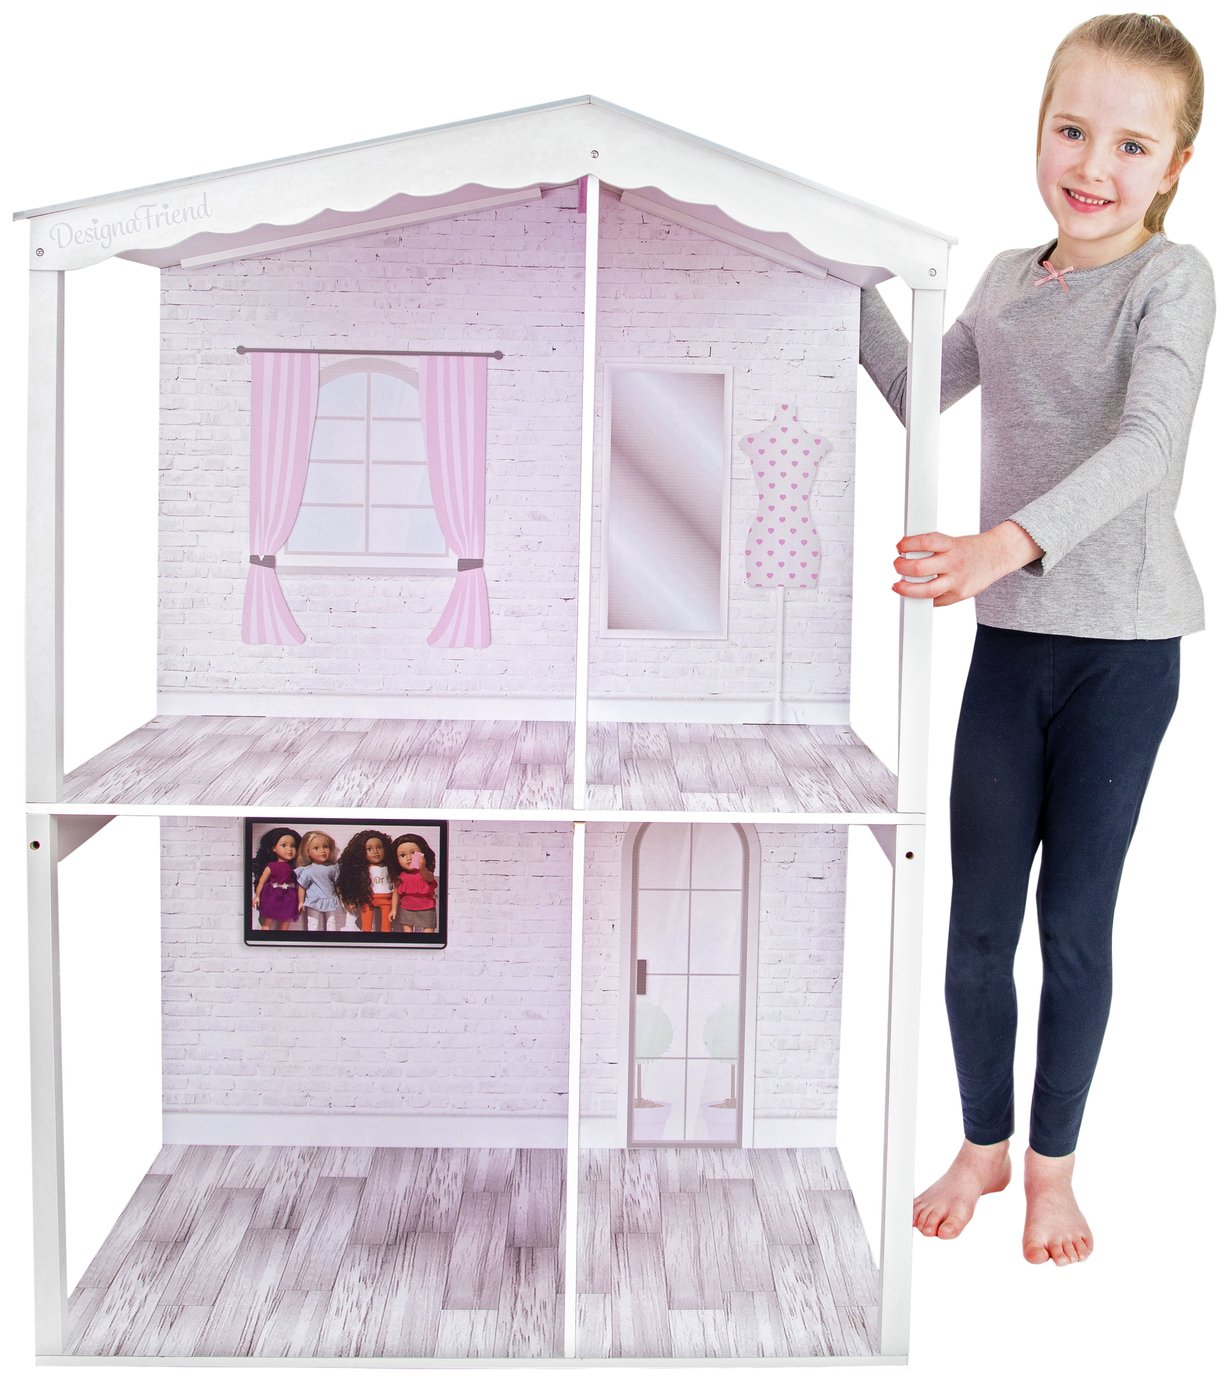 chad valley dolls house